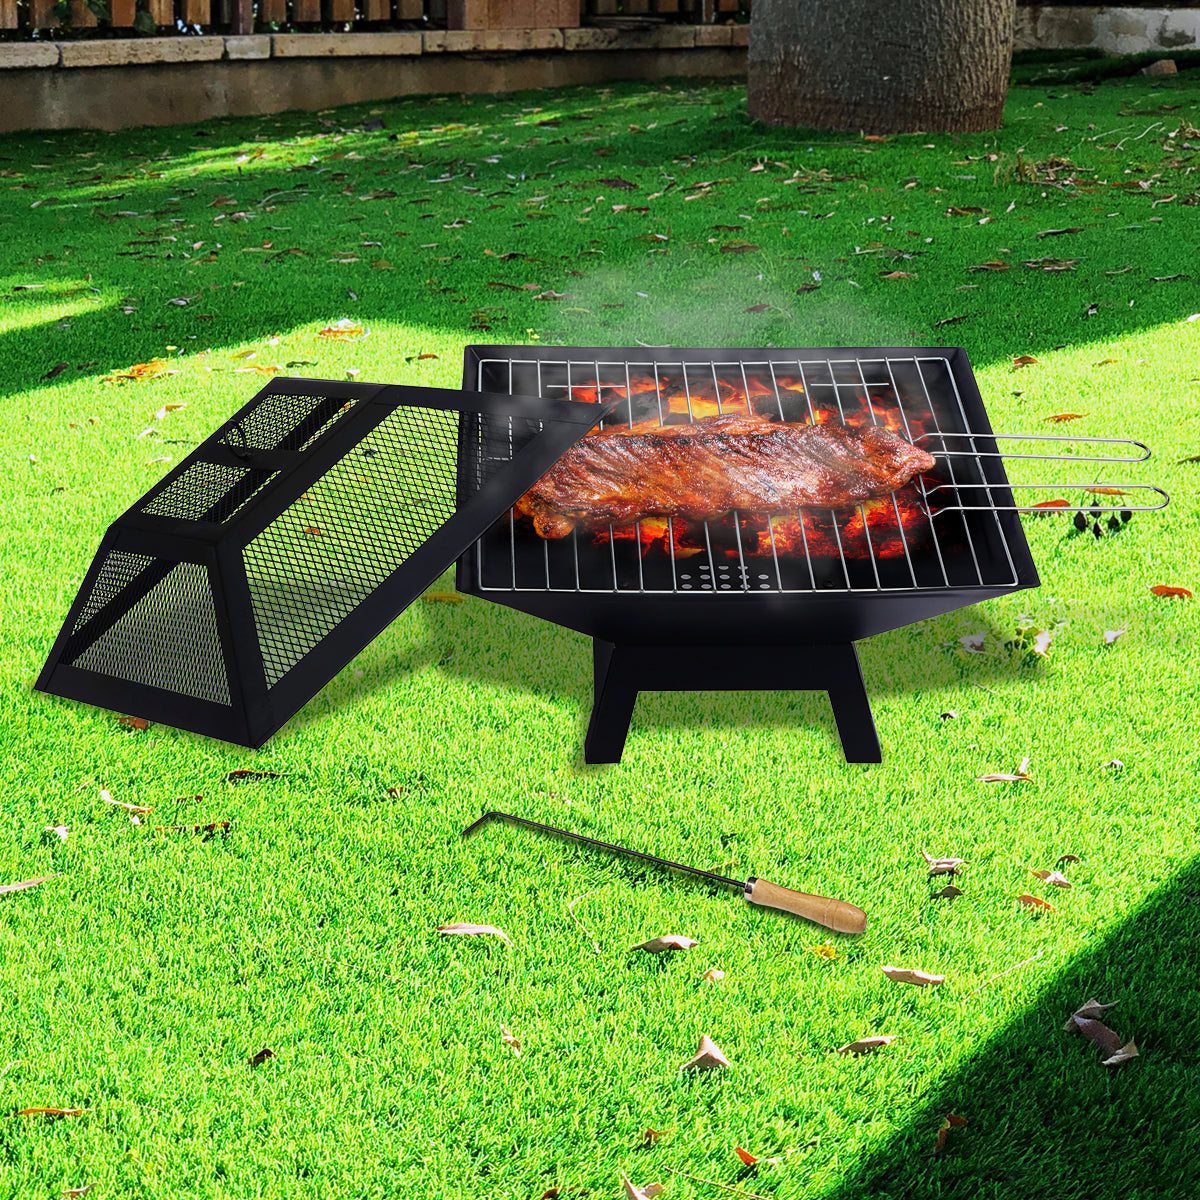 Versatile Portable Fire Pit: Your Essential Companion for Outdoor BBQs, Grilling, Cooking, and Camping Adventures